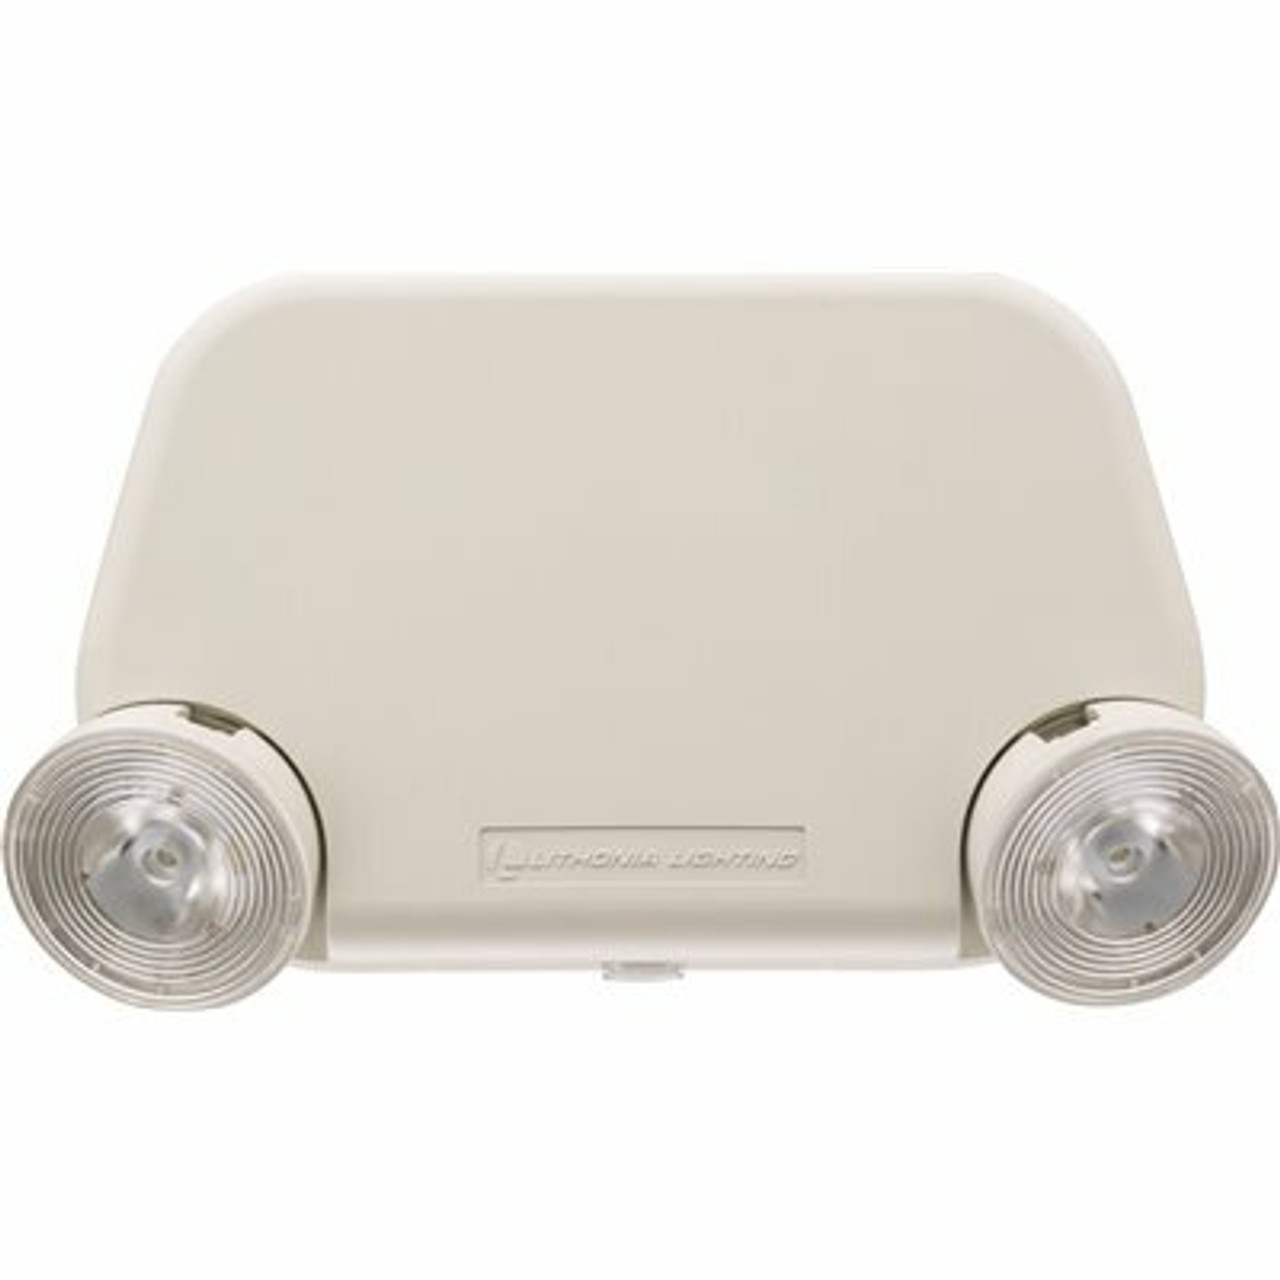 Lithonia Lighting Contractor Select Eu2L 120/277-Volt Integrated Led Emergency Light Fixture With 3.6-Volt Battery